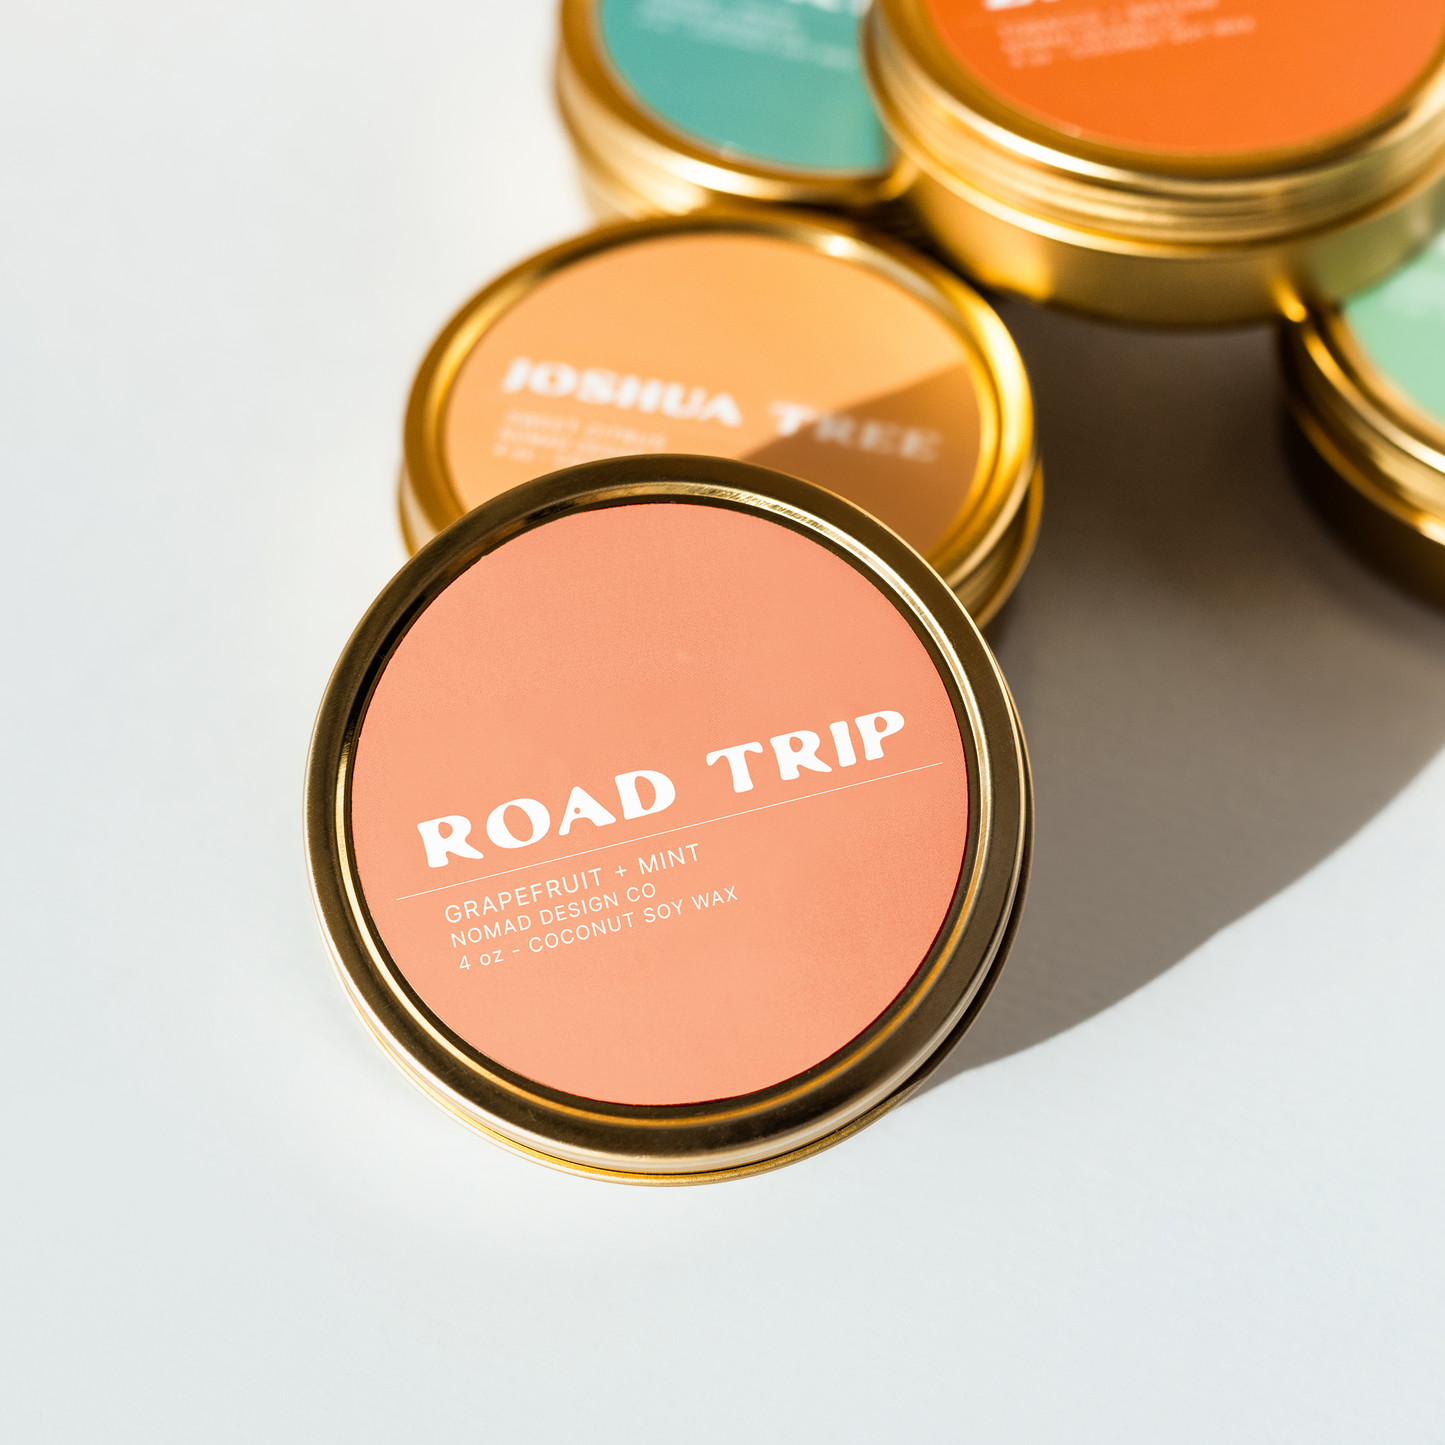 Road Trip Travel Tin Candle